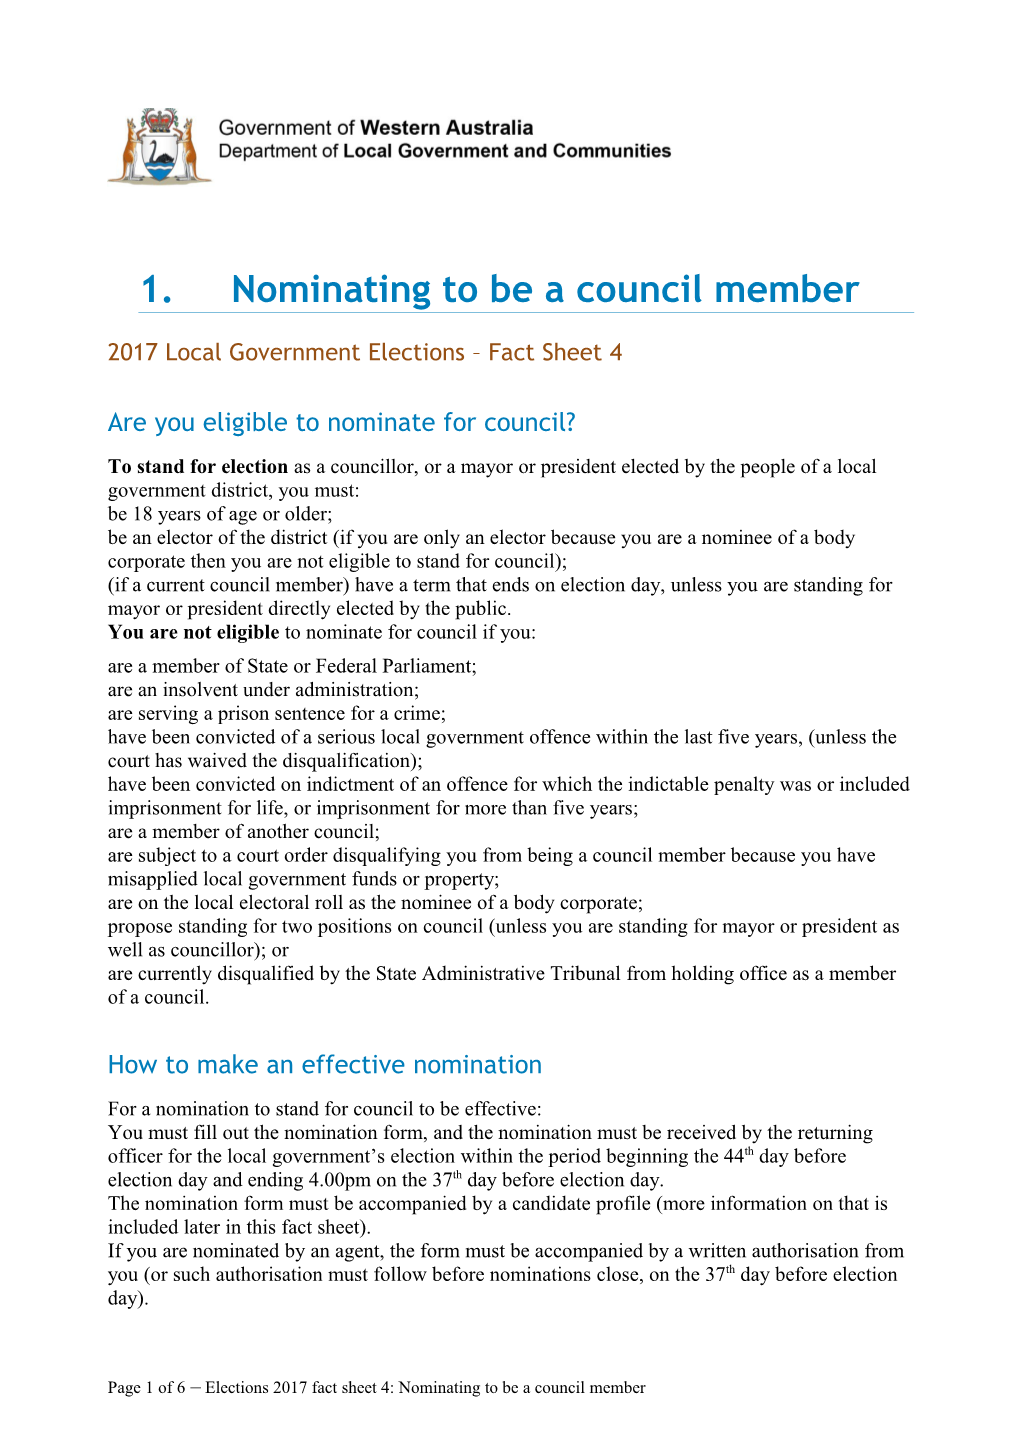 Local Government Elections 2017 - Fact Sheet 04 - Nominating to Be a Council Member